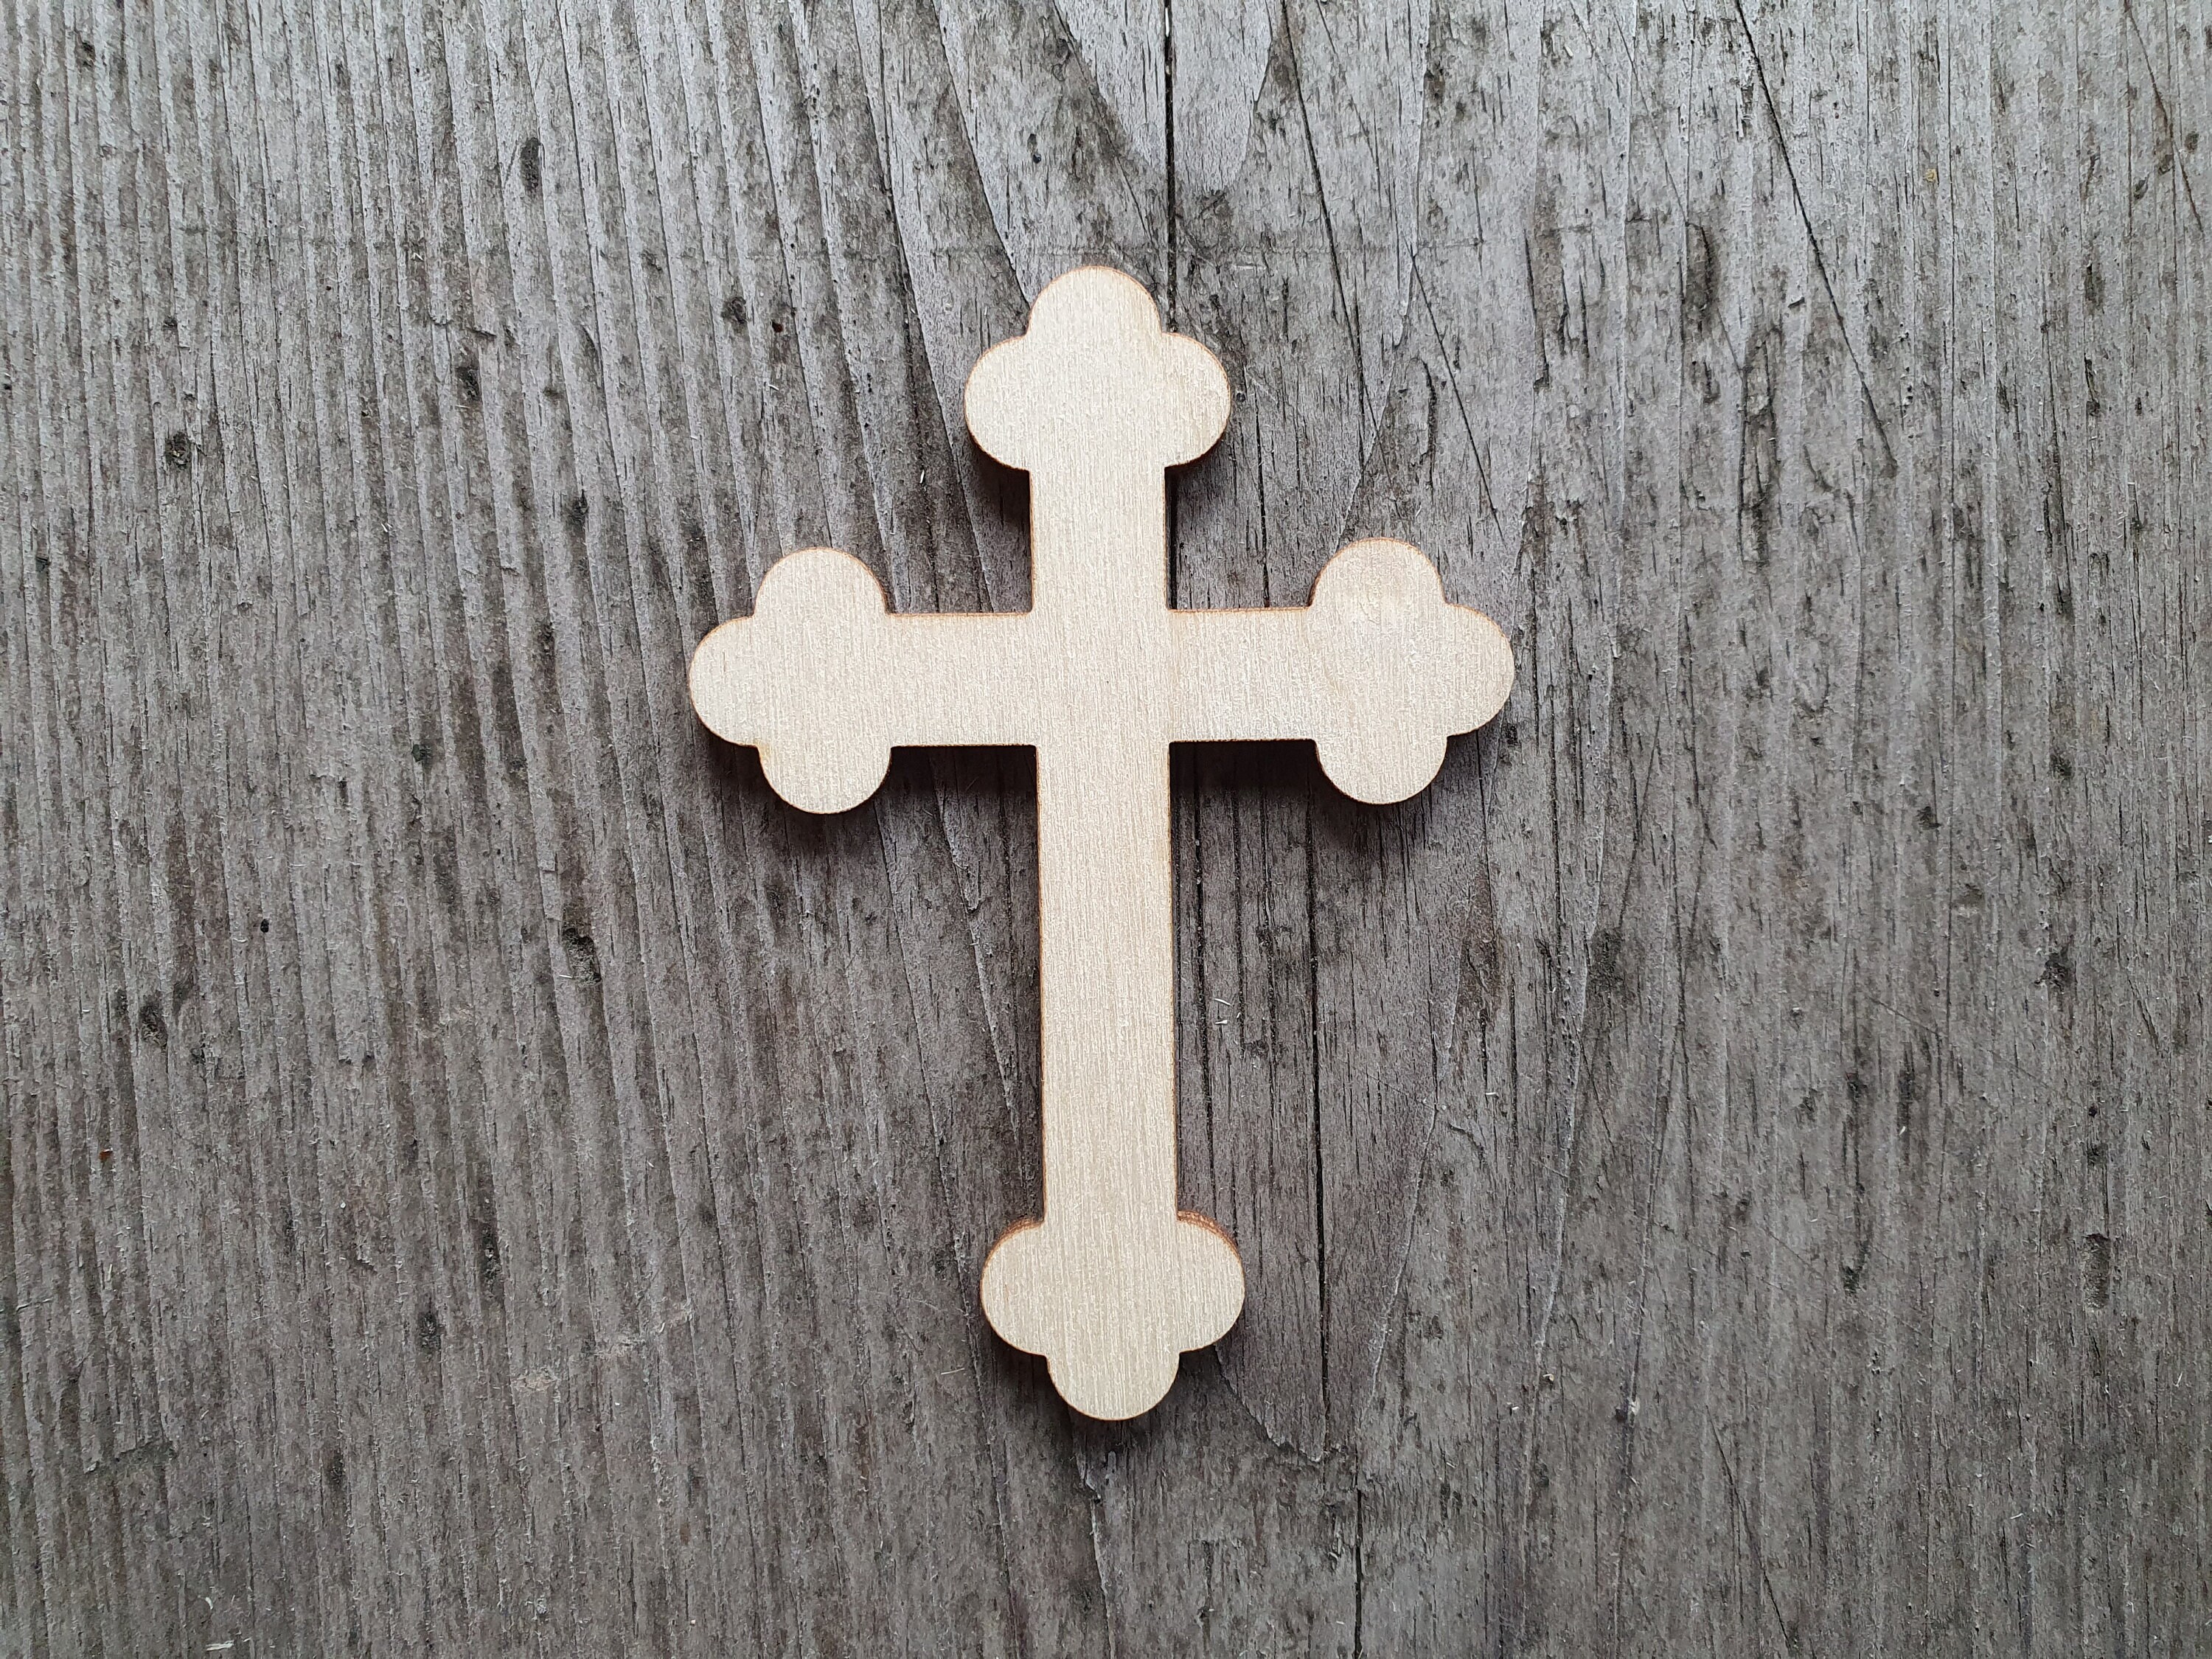 wholesale wooden crosses for crafts orthodox